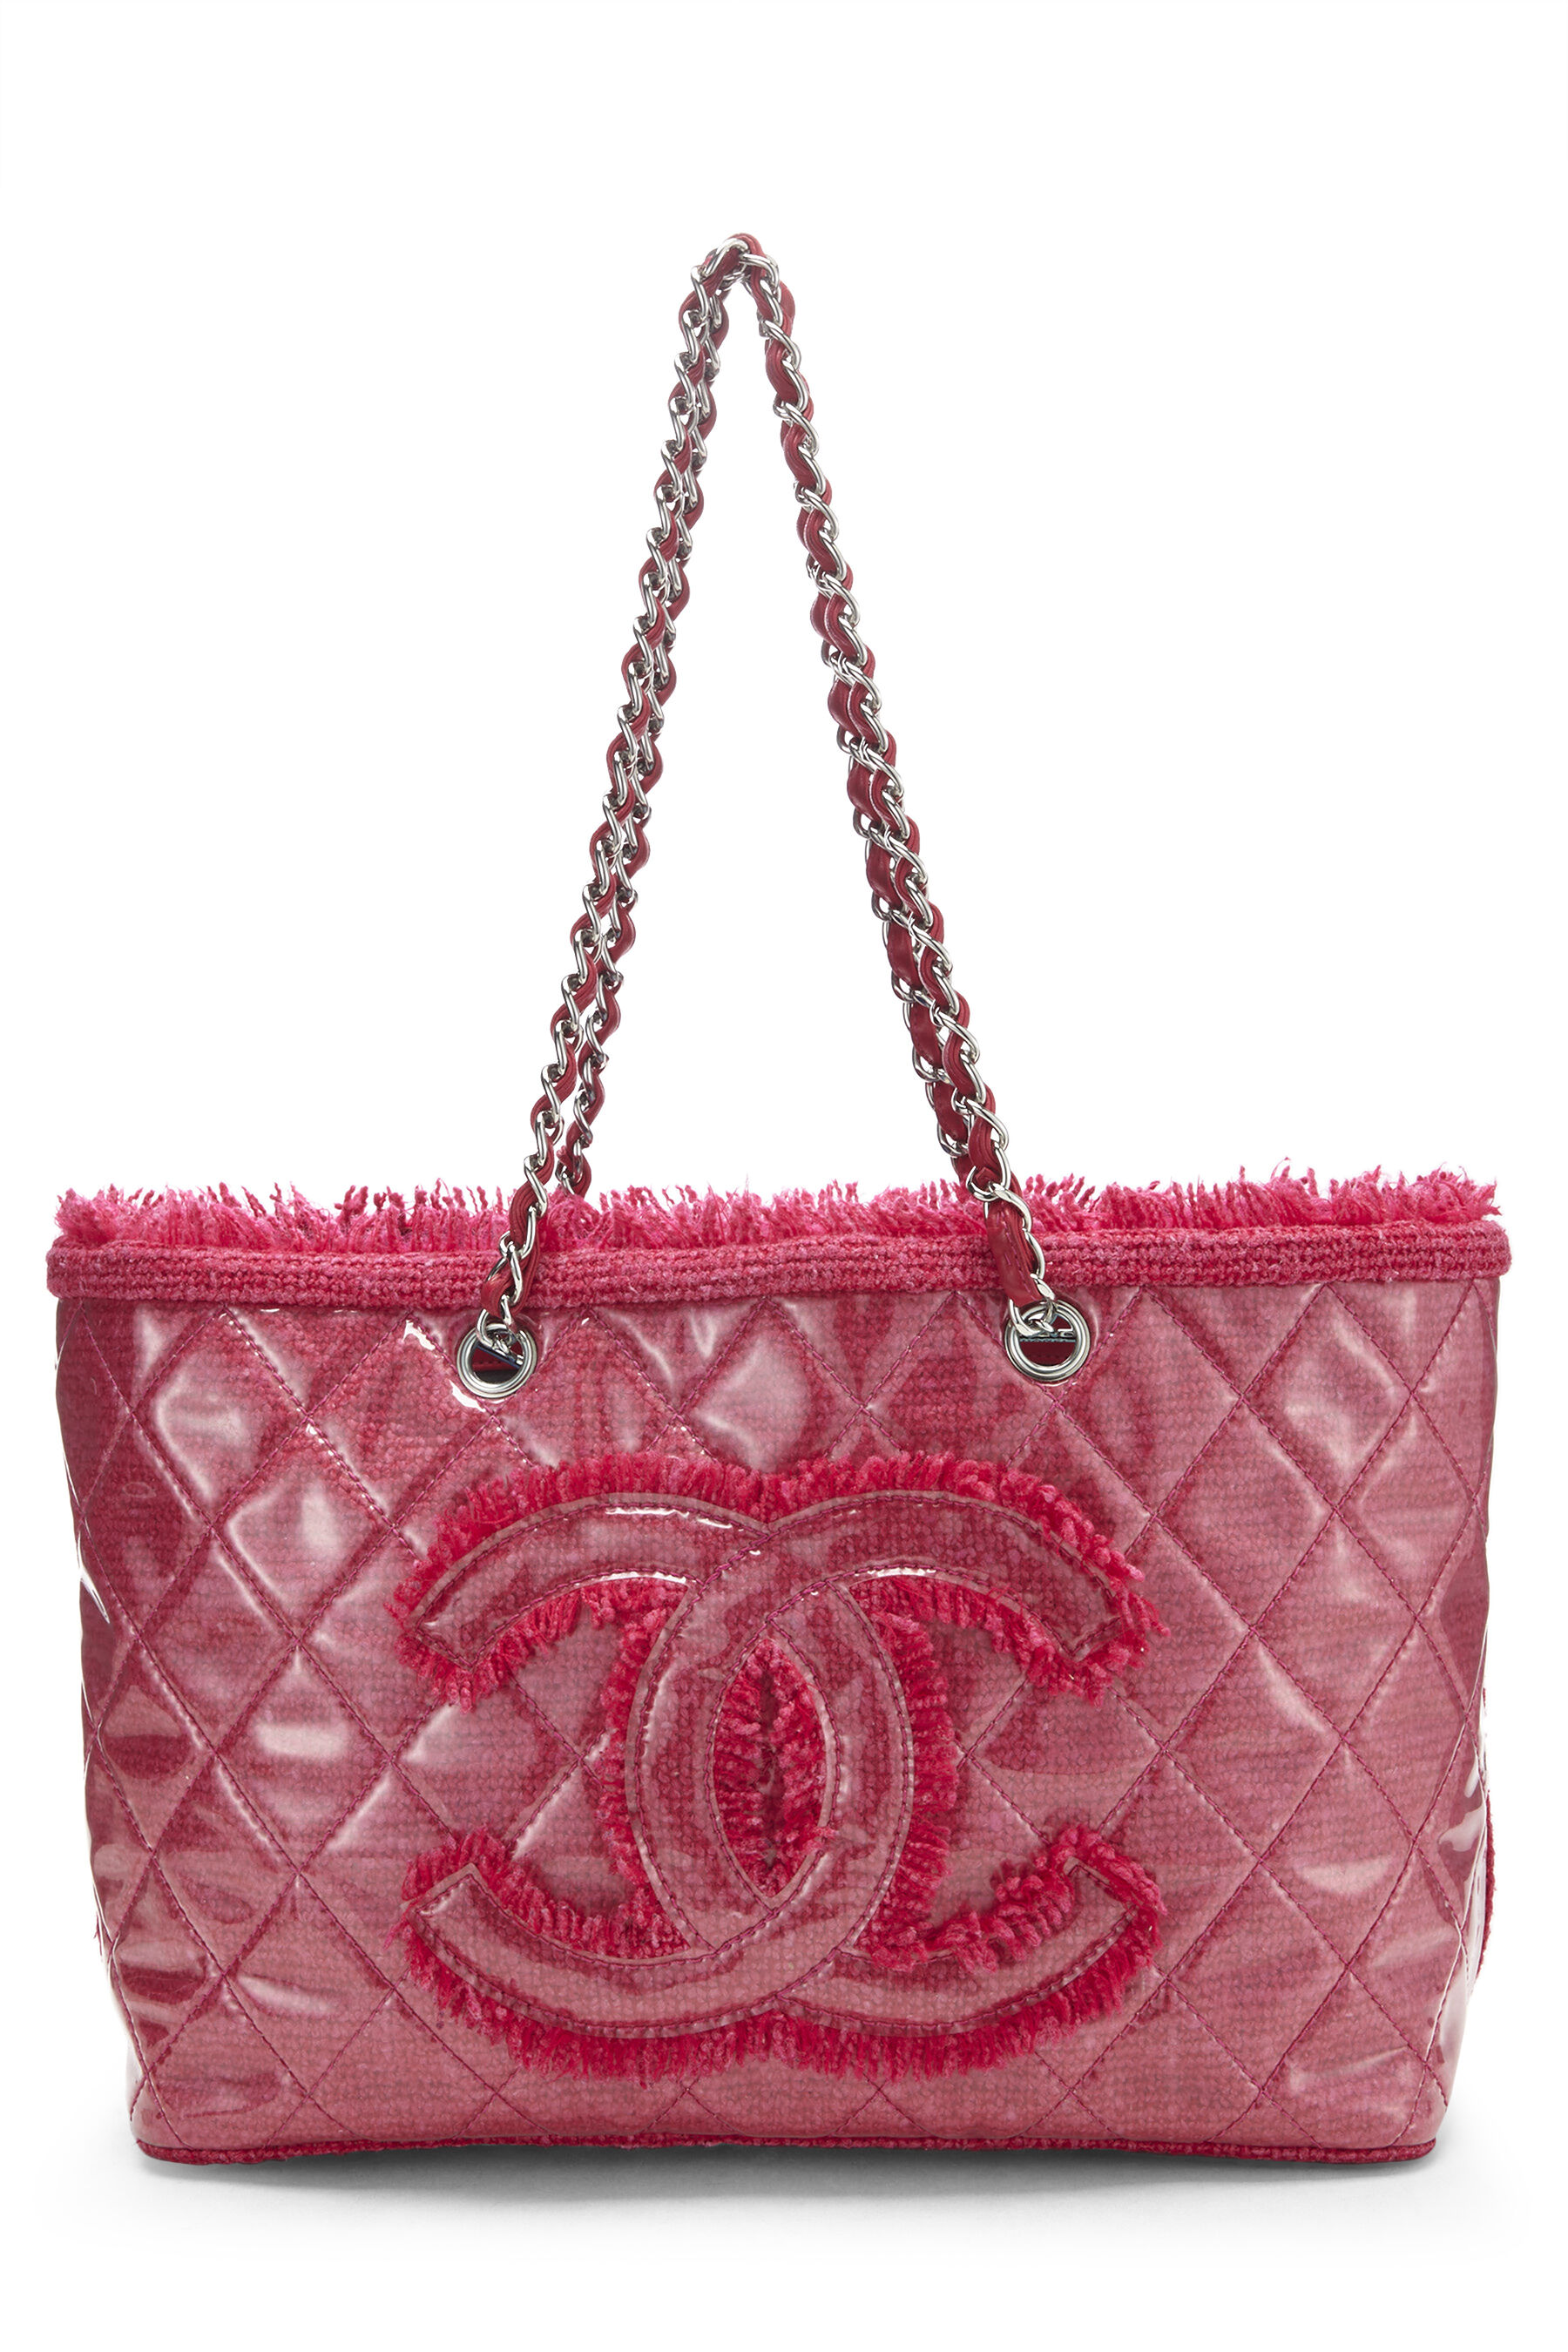 Chanel Pink and Green Large Vinyl Shopper- AWL2458 – LuxuryPromise